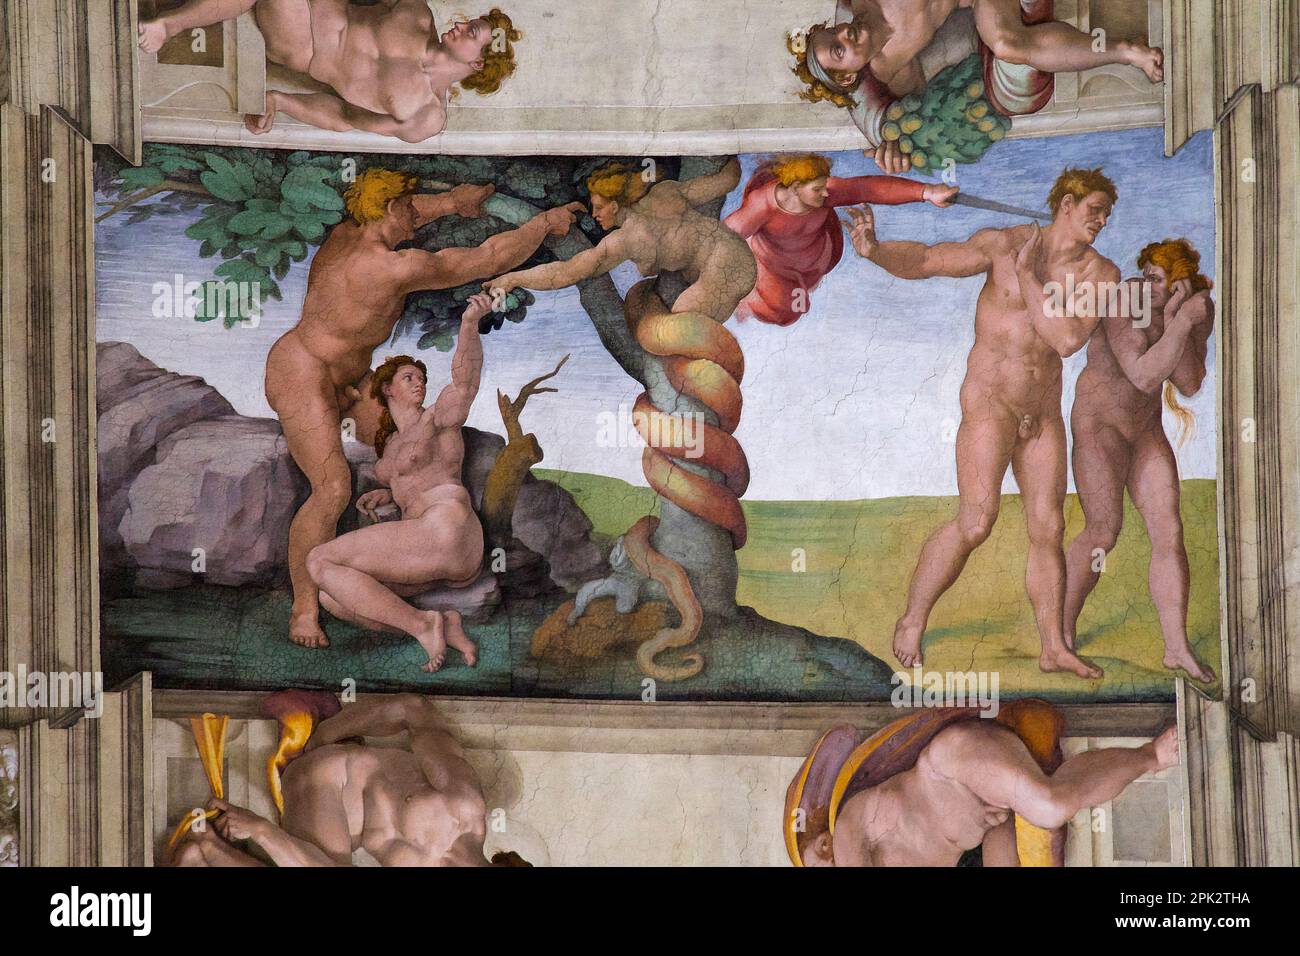 Fall and Expulsion from Garden of Eden, 1509-10, fresco, ceiling of Sistine Chapel, by Buonarroti Michelangelo, Vatican Museums, Rome, Italy, Stock Photo